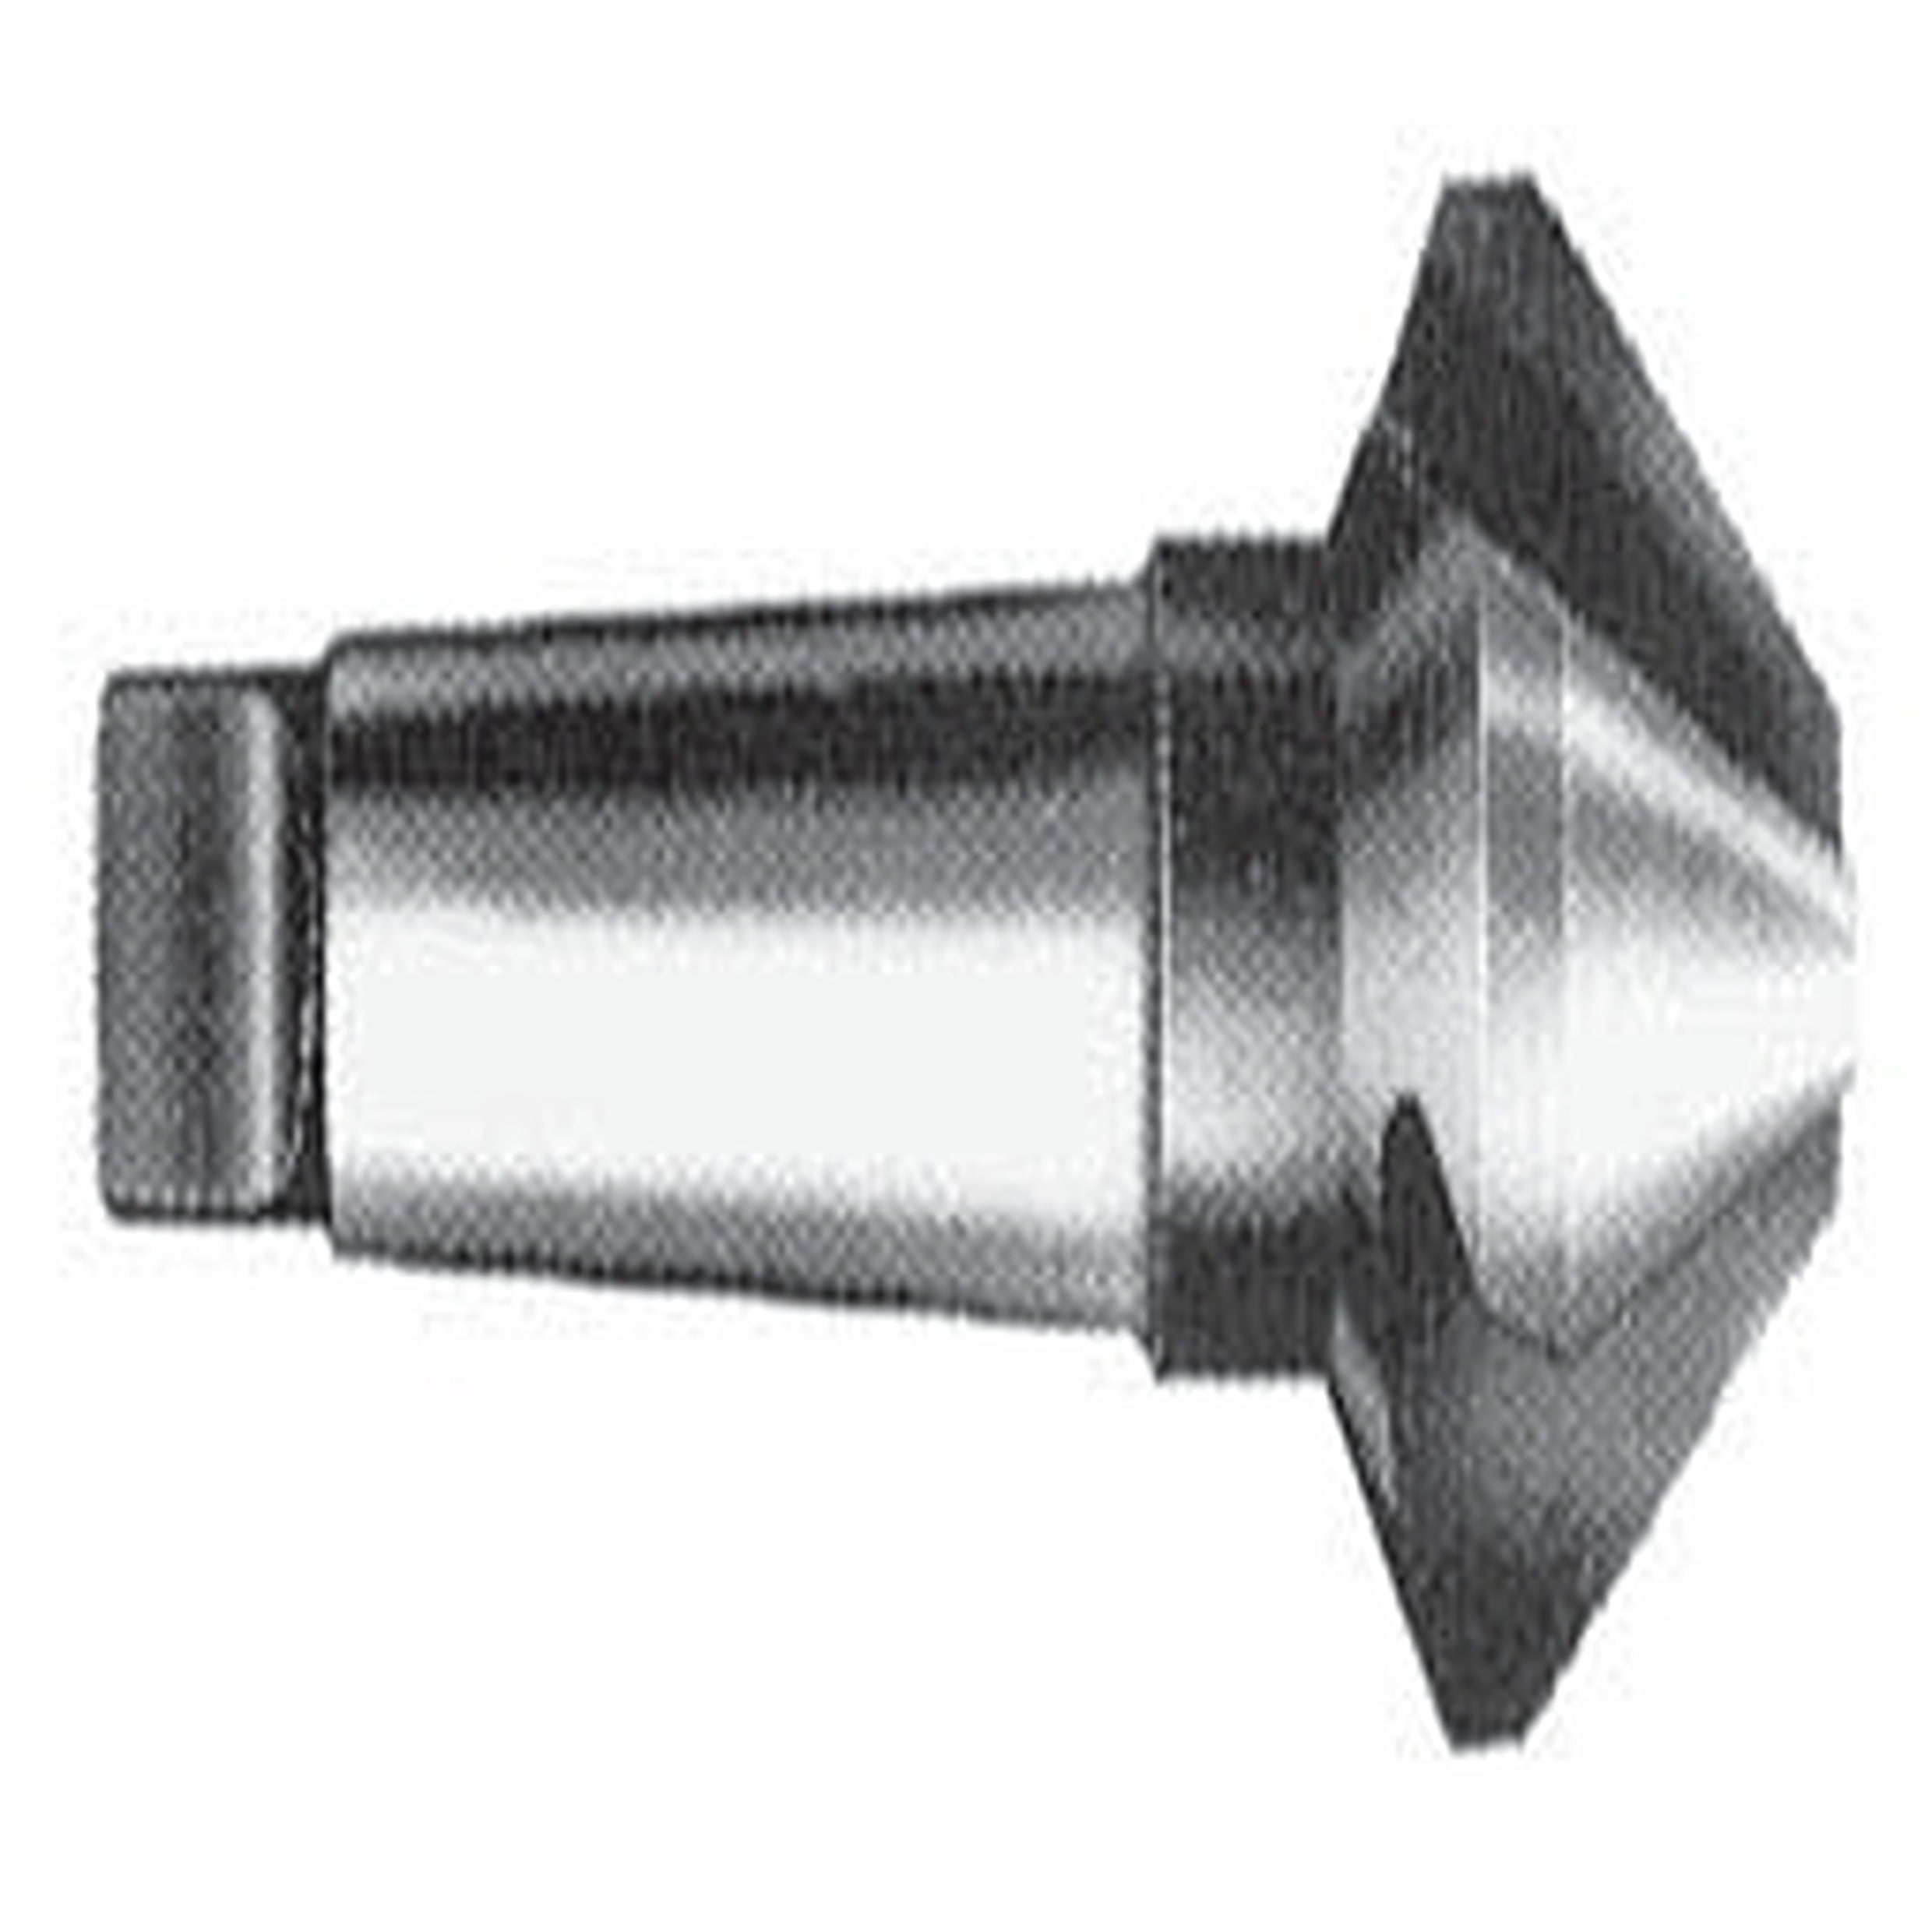 YEW AIK AG02113 H.S.S Taper Shank 3 Flutes Countersink (G105) - Premium H.S.S Taper Shank 3 Flutes Countersink from YEW AIK - Shop now at Yew Aik.